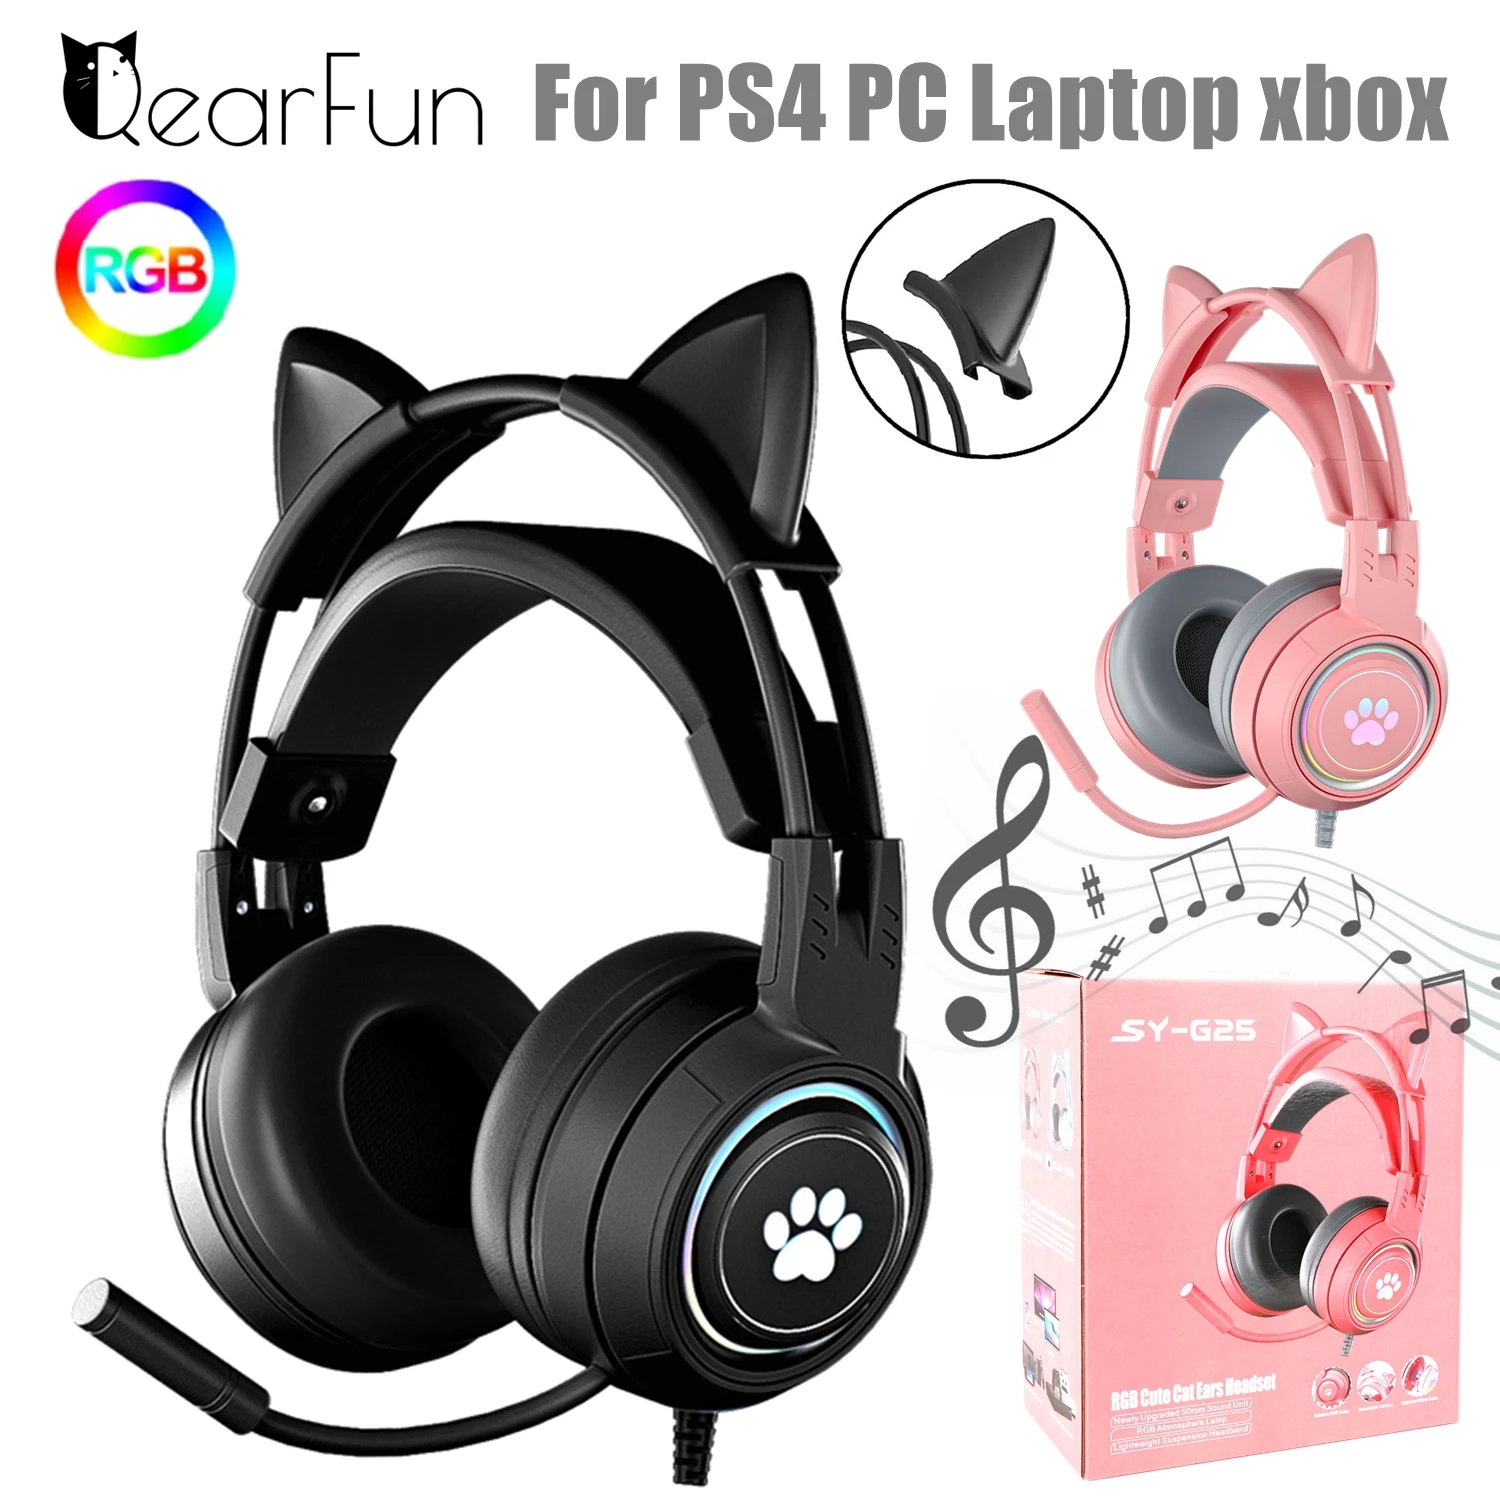 HiFi Stereo PC Headset Gamer Girls Pink Cat Headphones with Microphone RGB Light for PS4 Laptop Phone Black Wired Earphone Gift